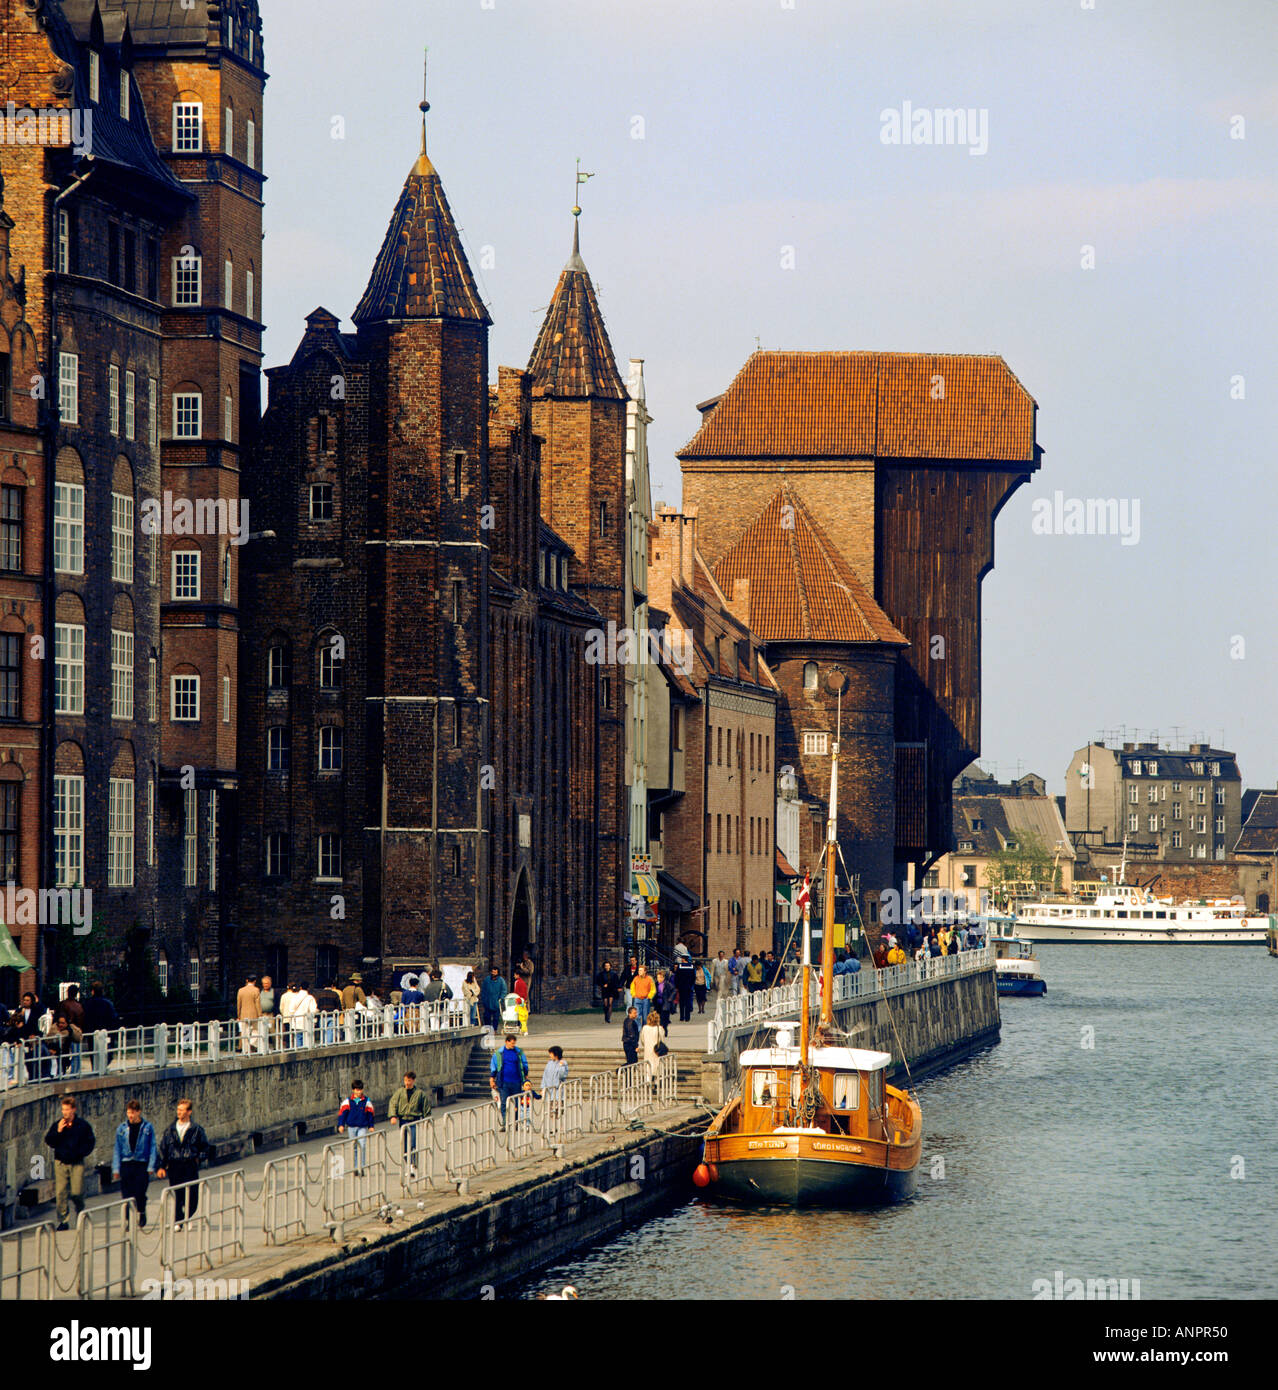 GDANSK CRANE GATE Old town buildings and crane gate on the banks of the River Motlawa Gdansk Poland Stock Photo